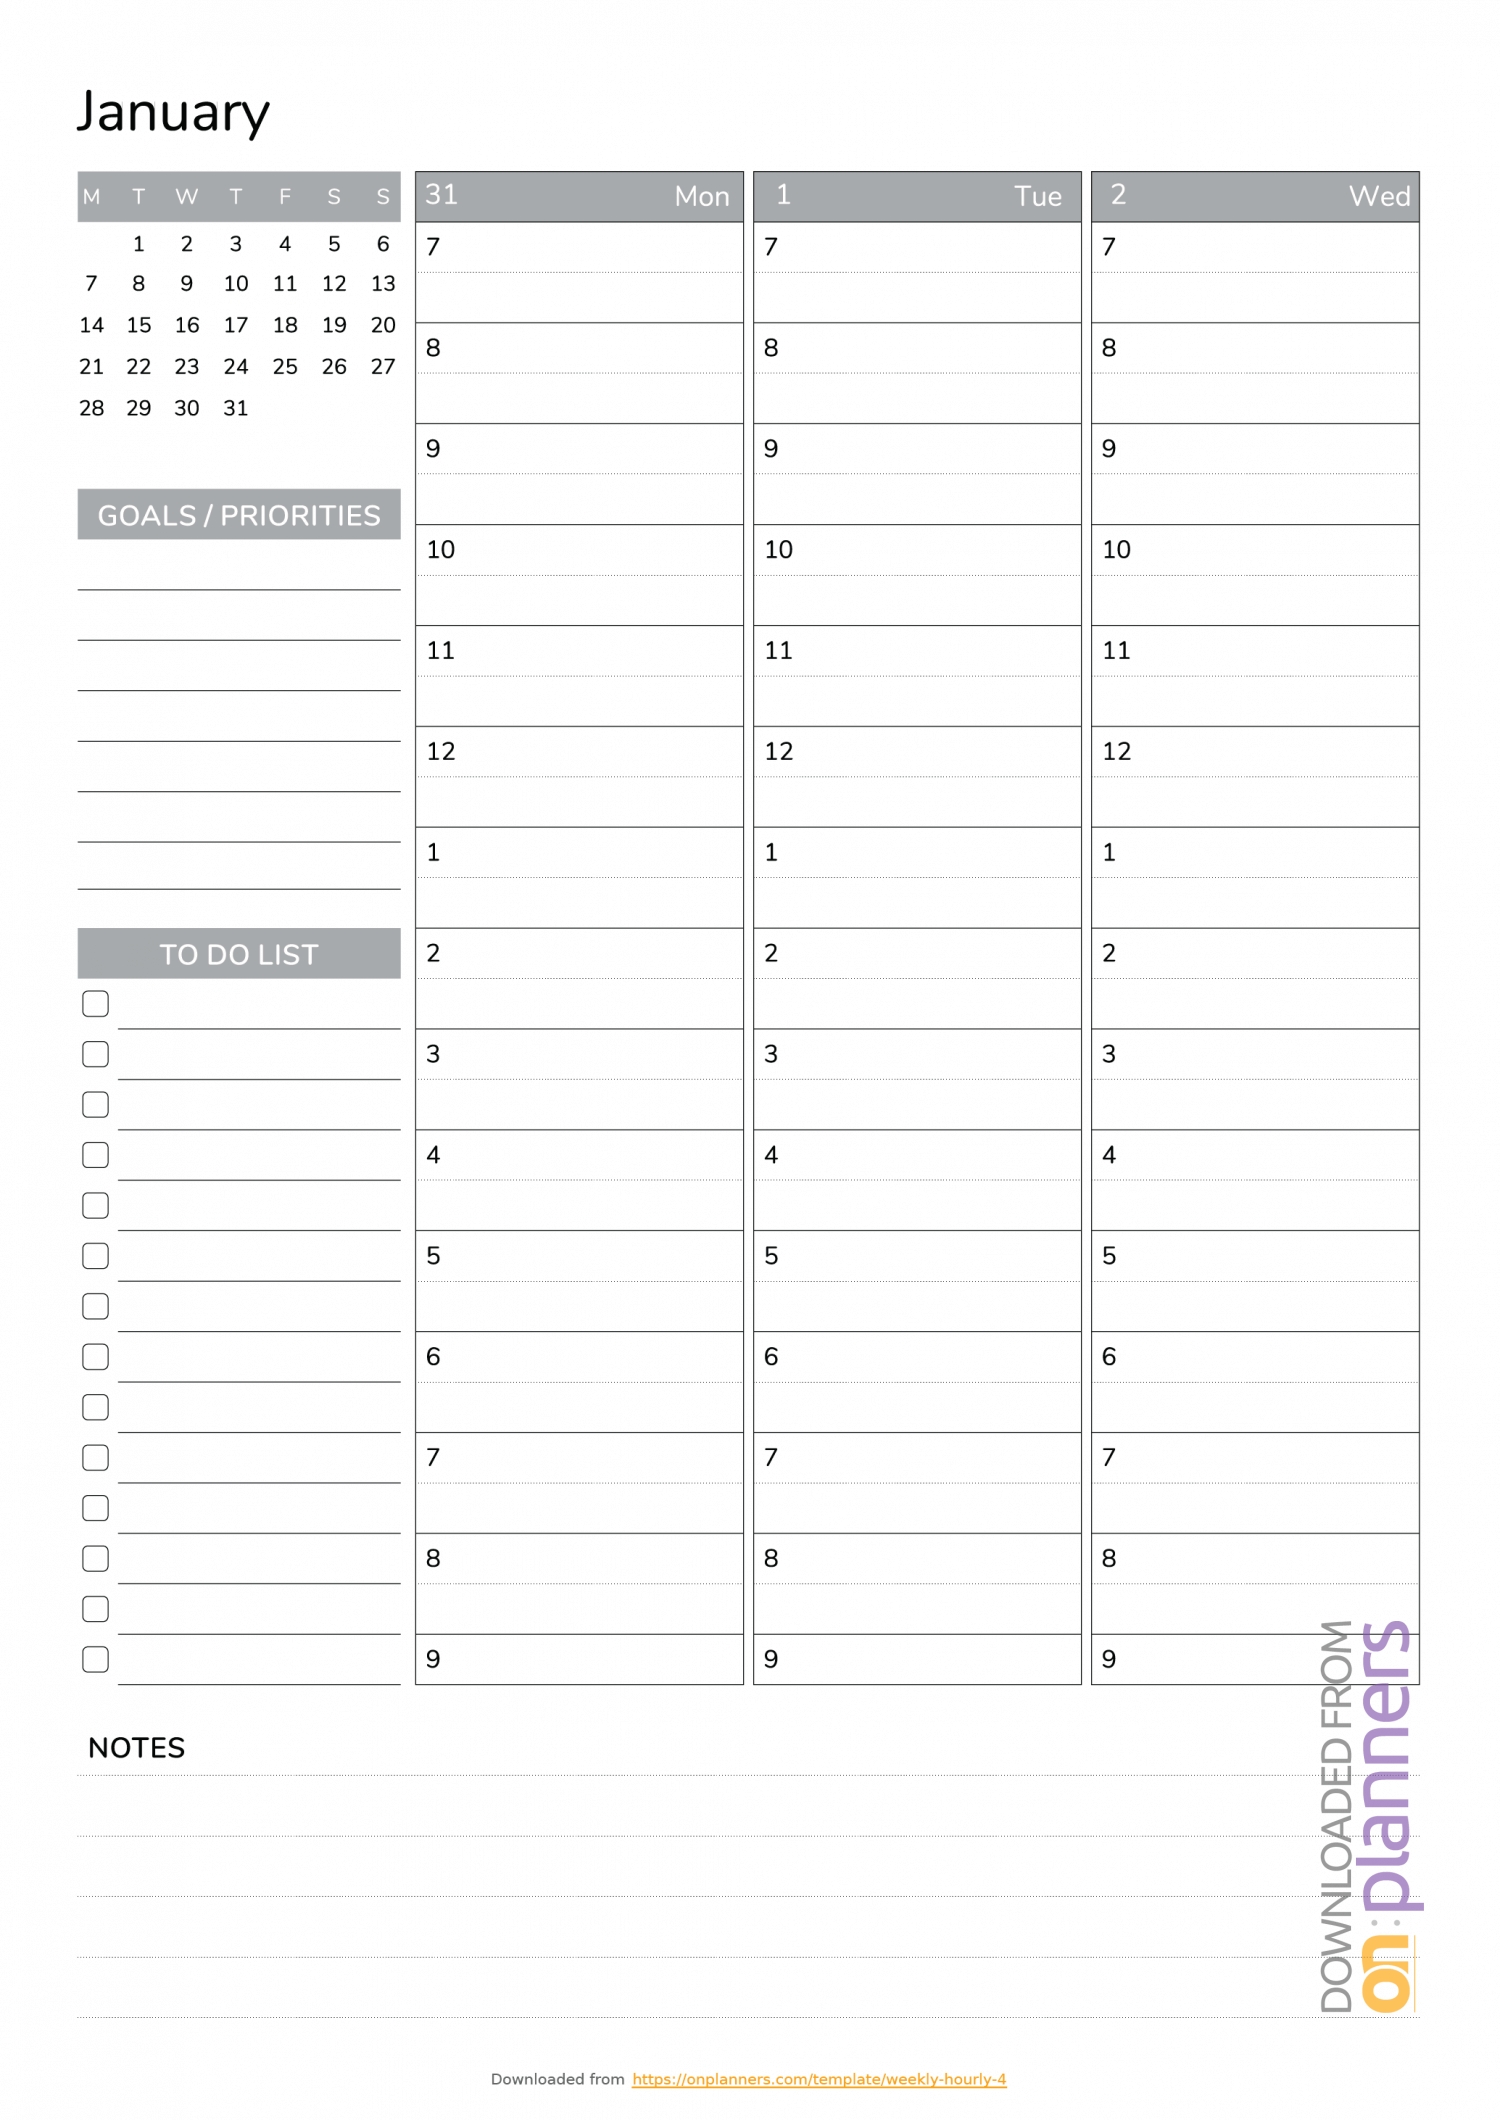 The Best Weekly Schedule Templates. Organize Your Time Calendar Template Copy Paste